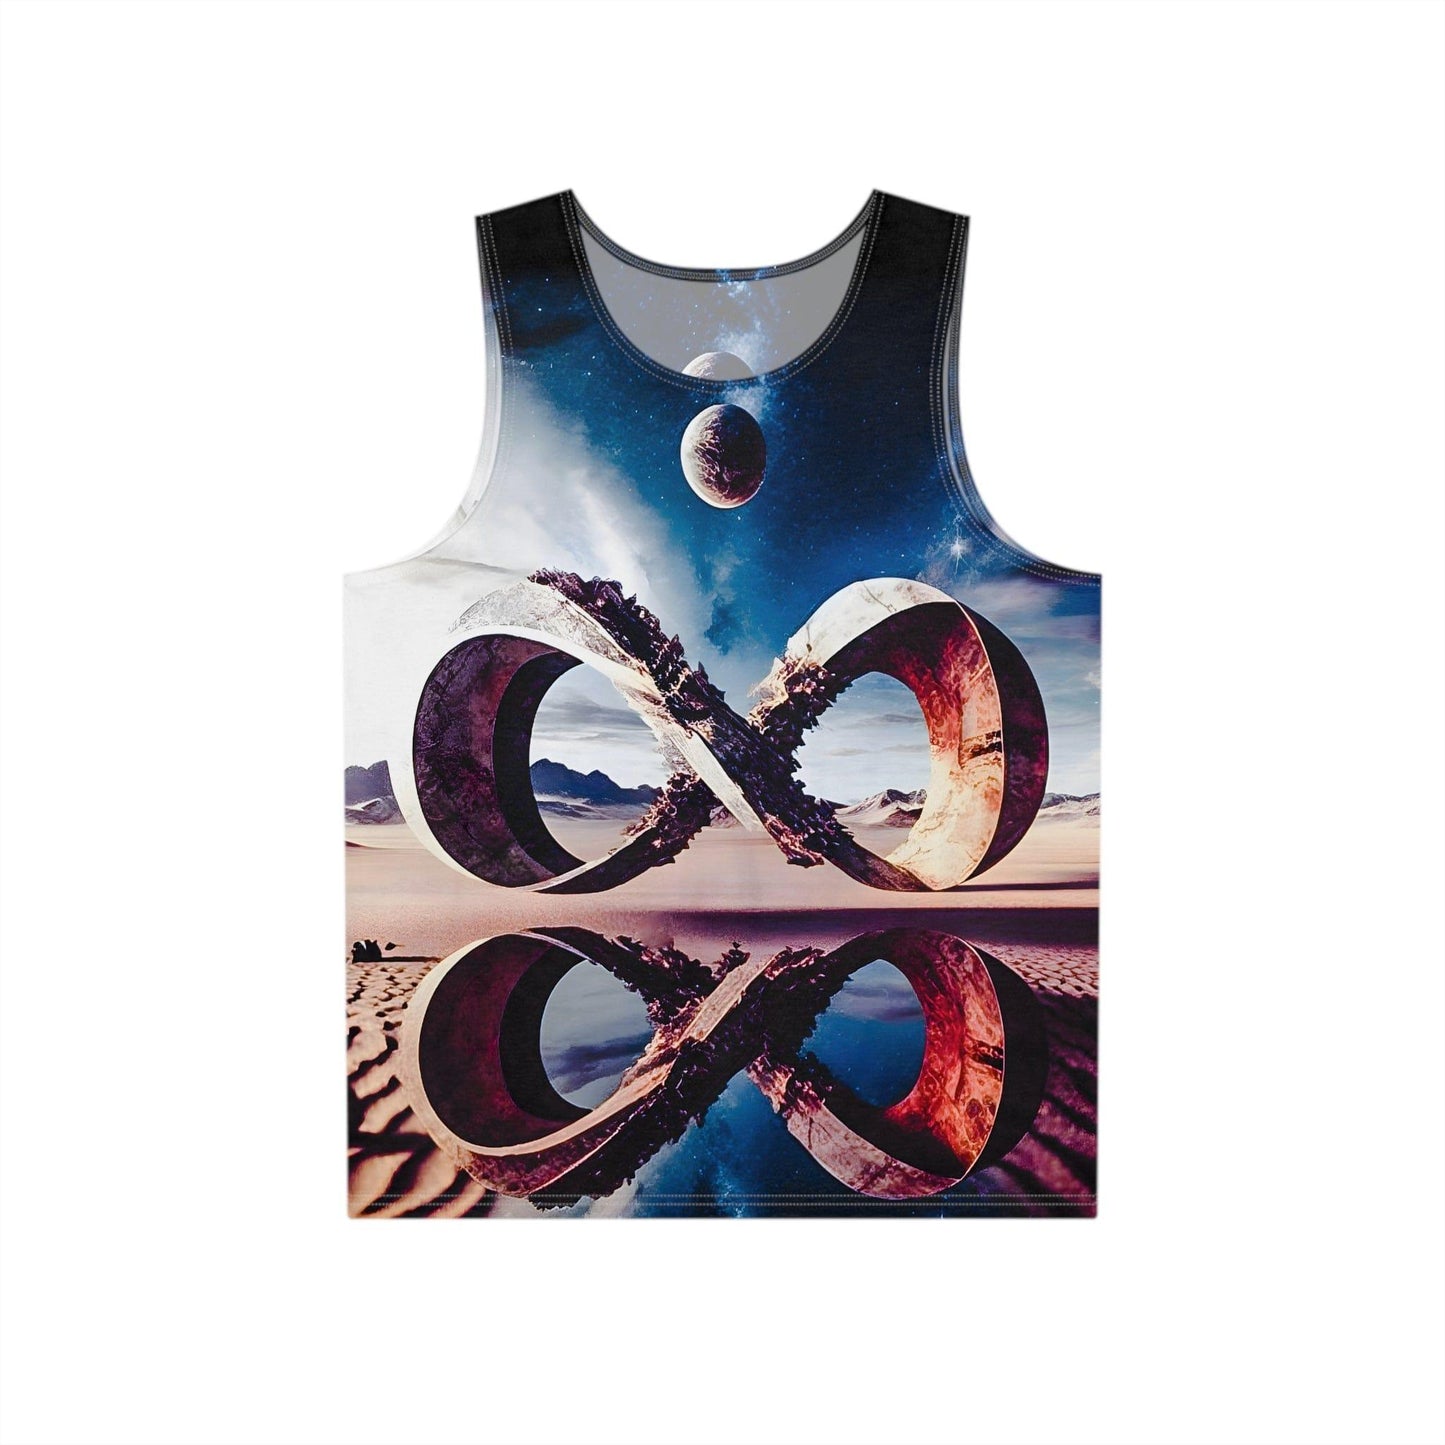 Infinite Possibilities Sublimation Tank Top Sublimation Print All-Over (AOP) Design Tank Top - Stylish Comfort for Festival, Gym, and Streetwear - Alchemystics.org